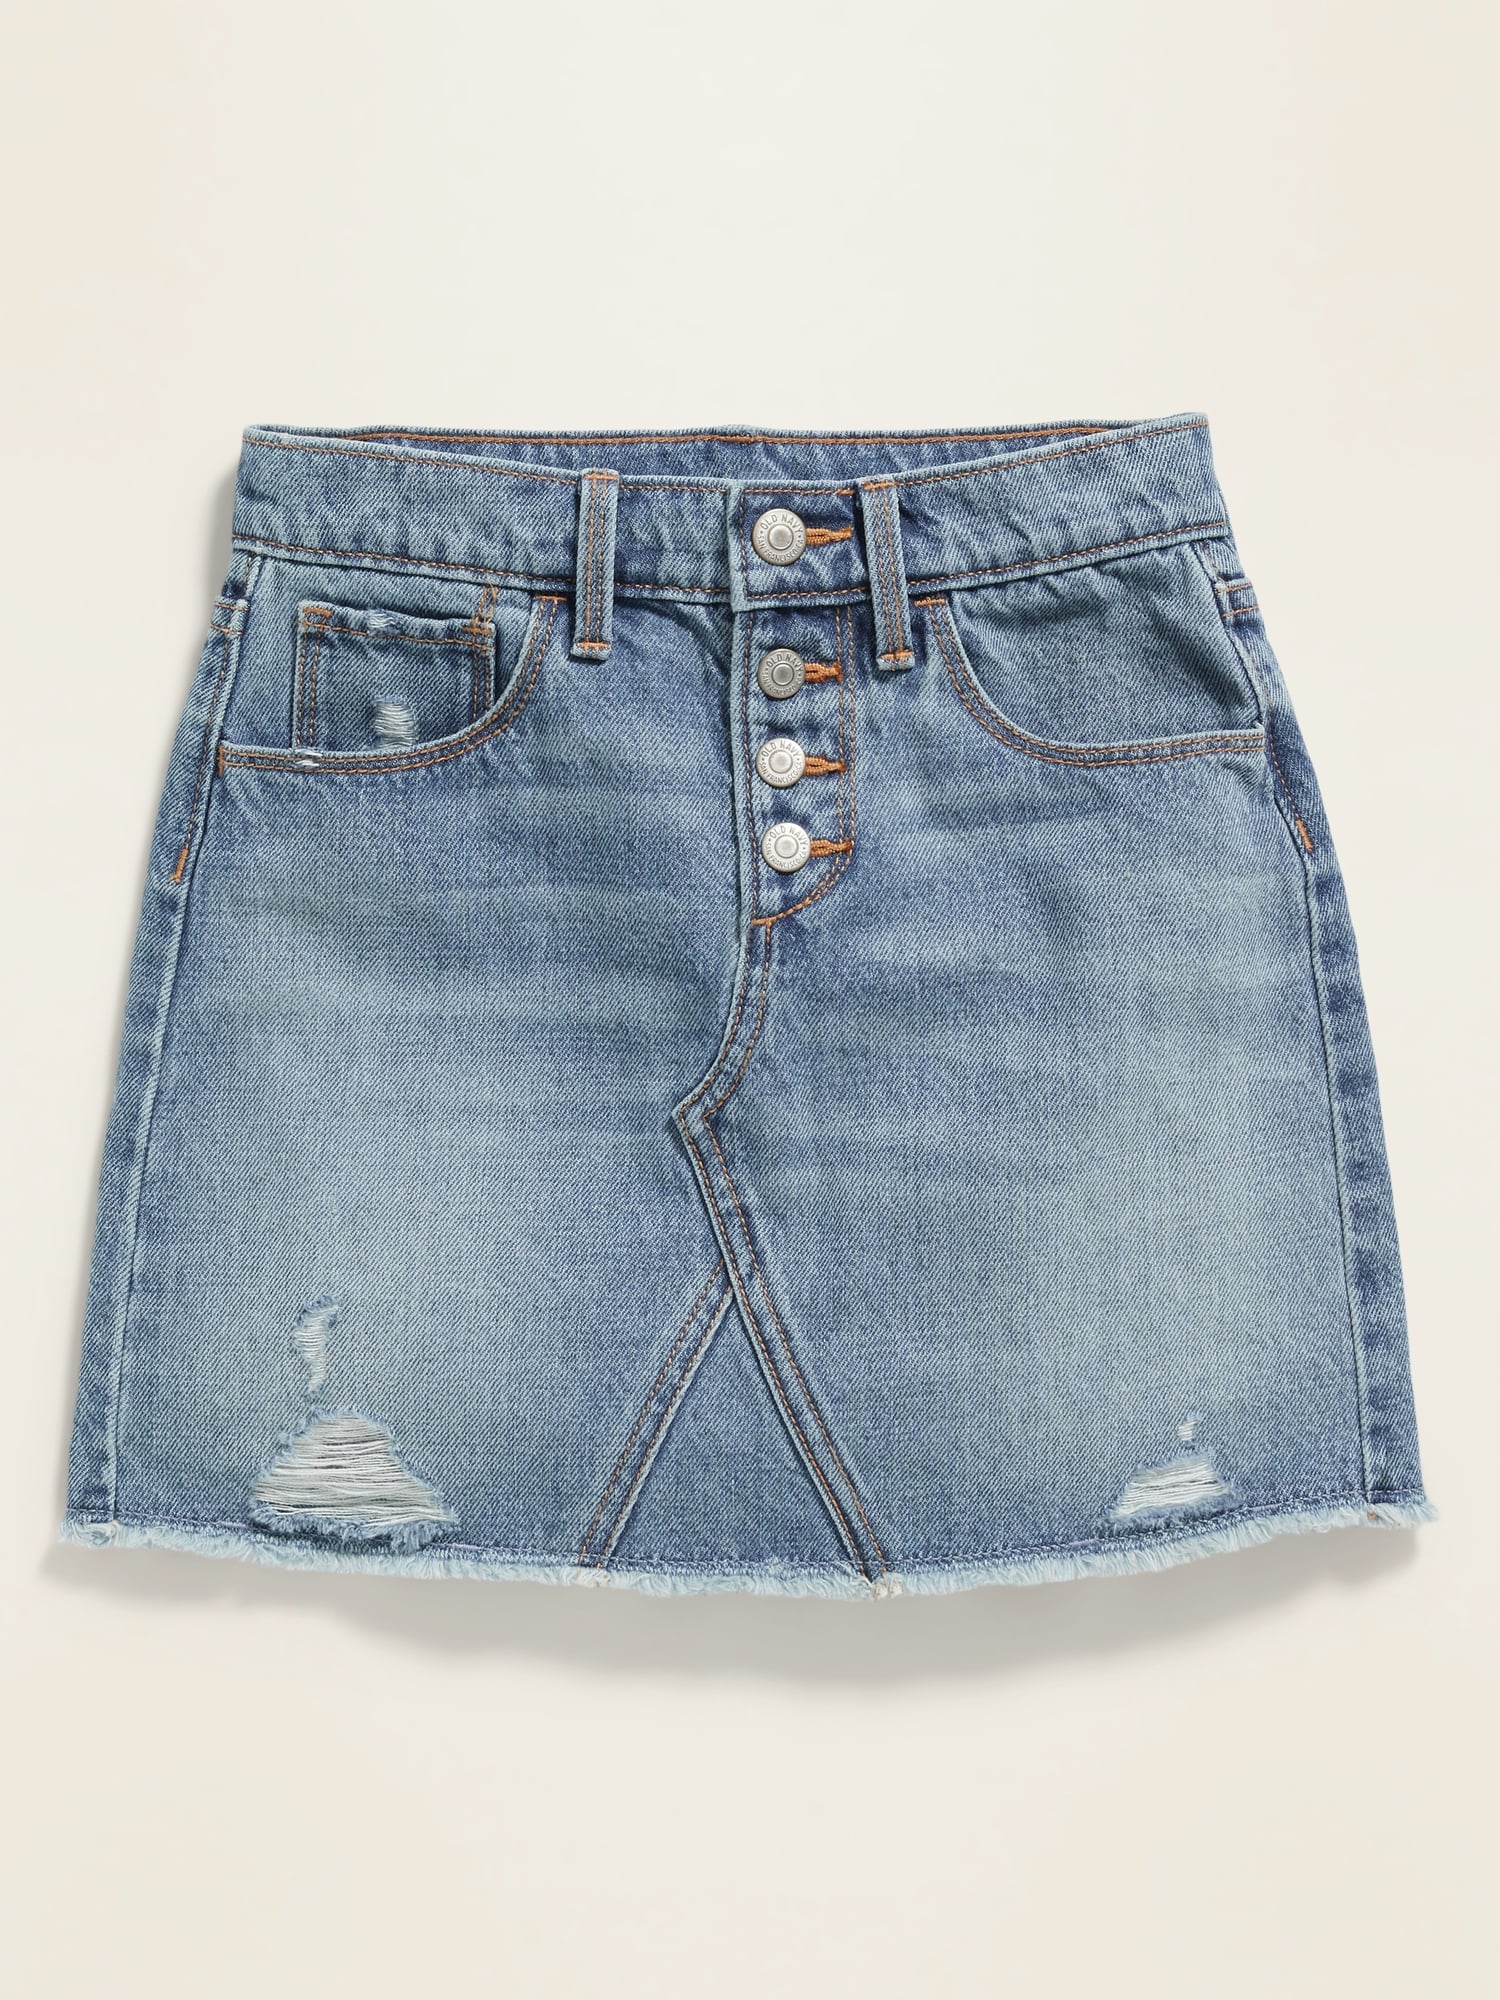 jean skirts for girls